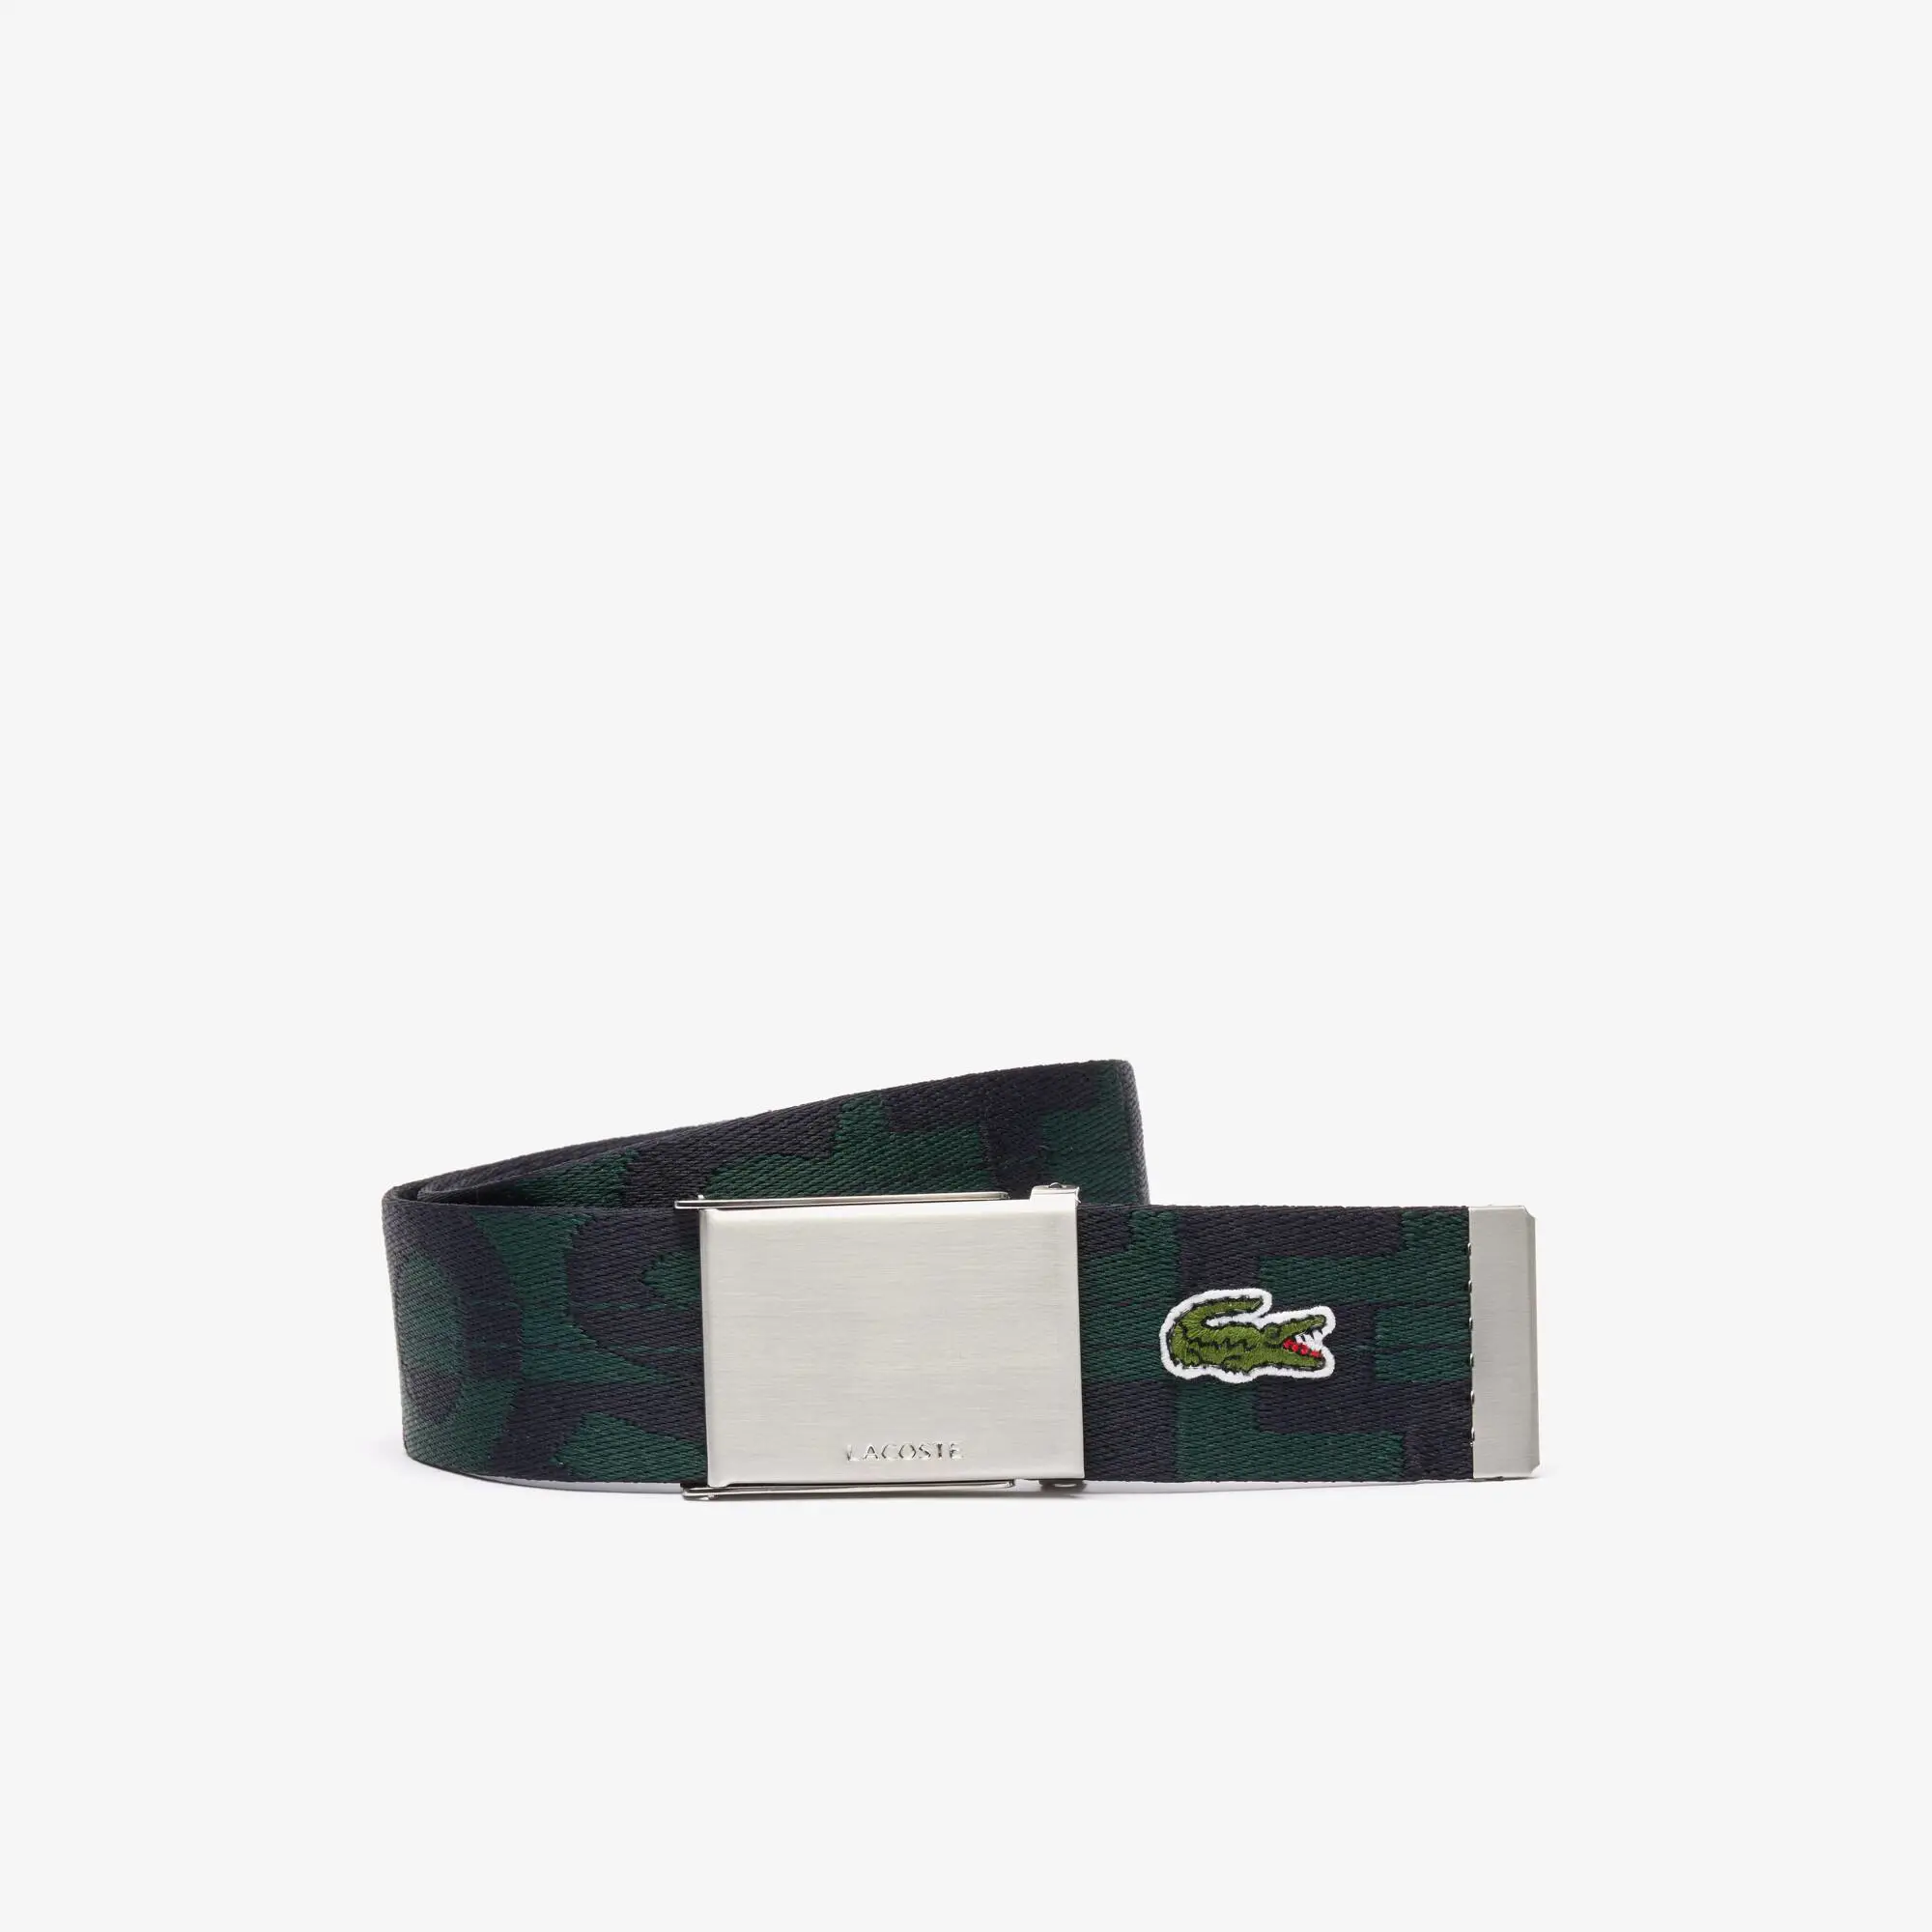 Lacoste Smooth Leather Belt/2 Buckle Gift Set. 1